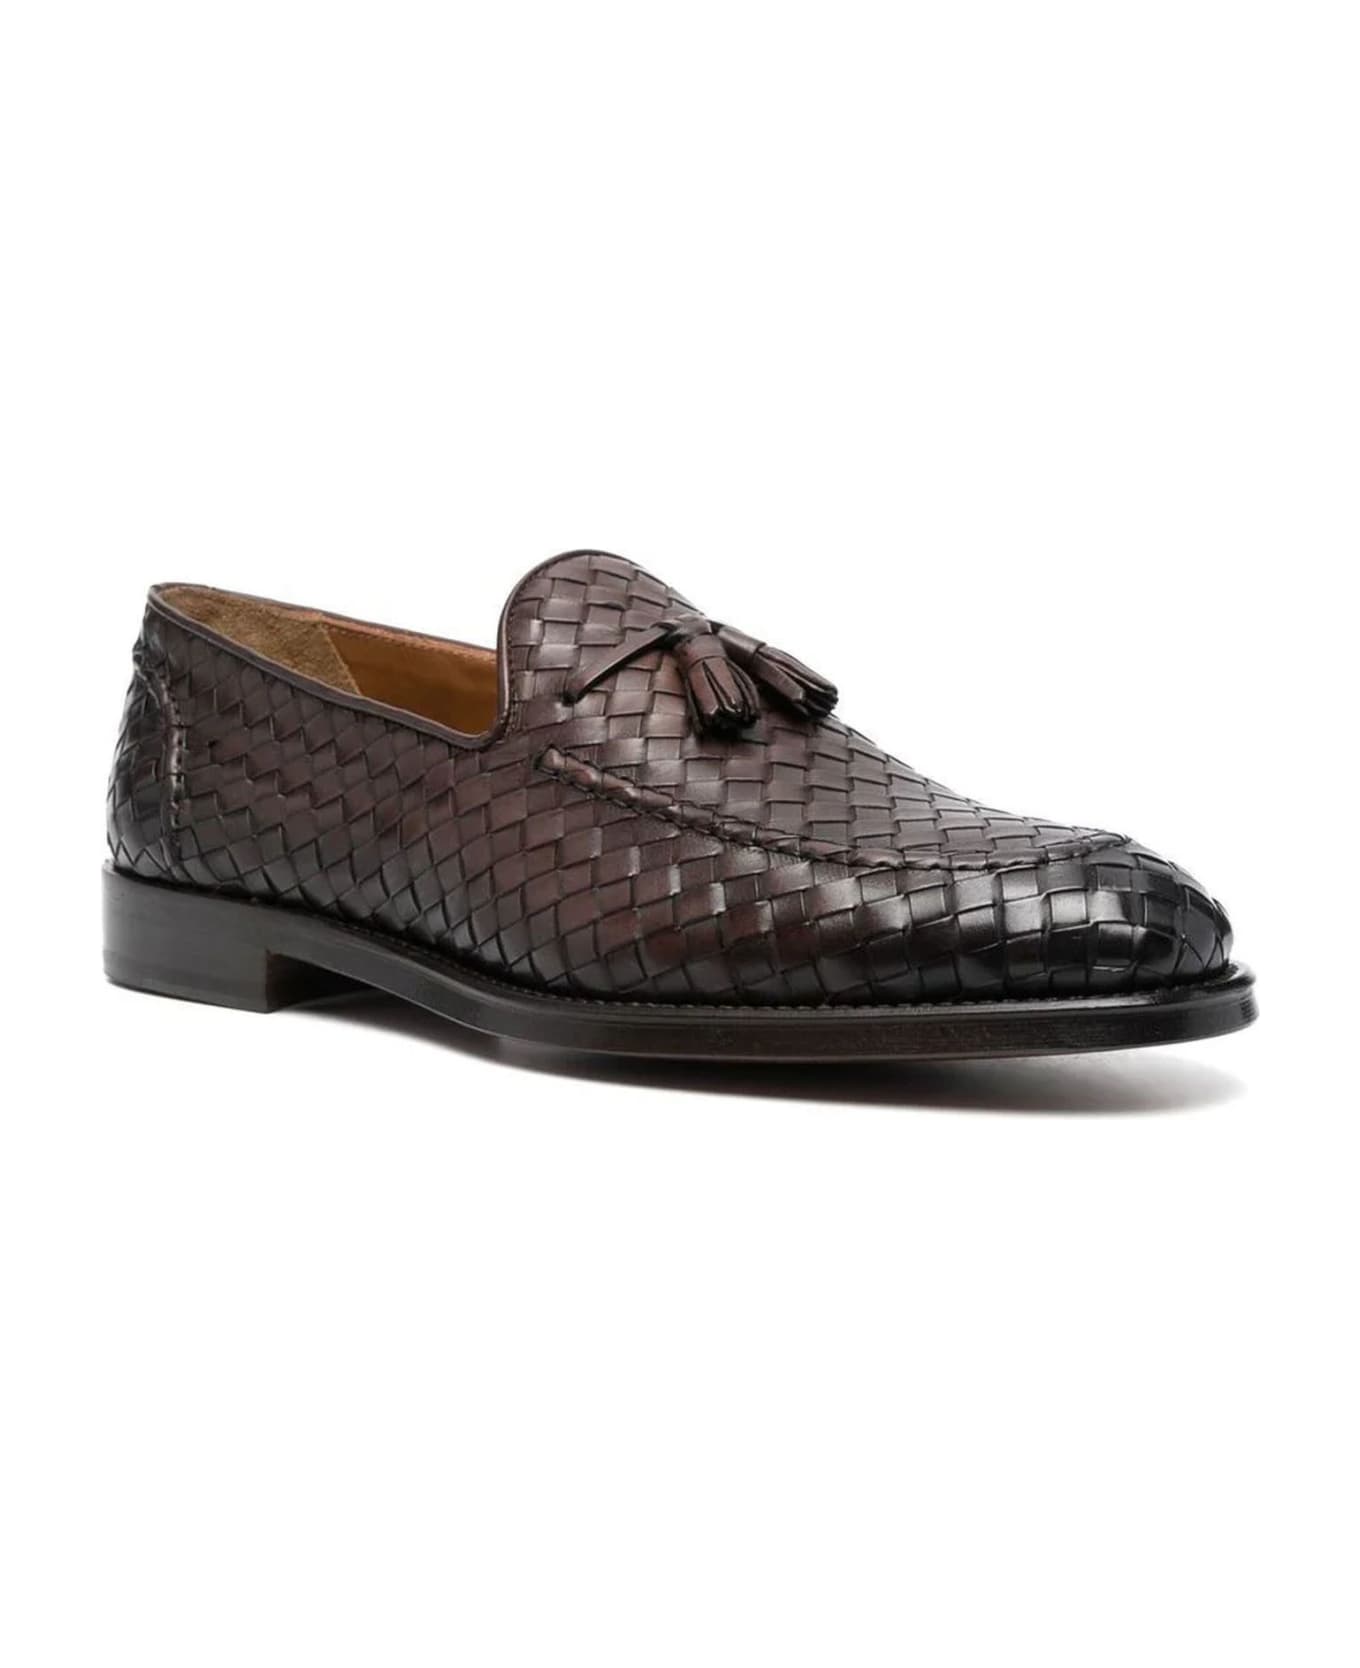 Doucal's Brown Calf Leather Loafers - Brown